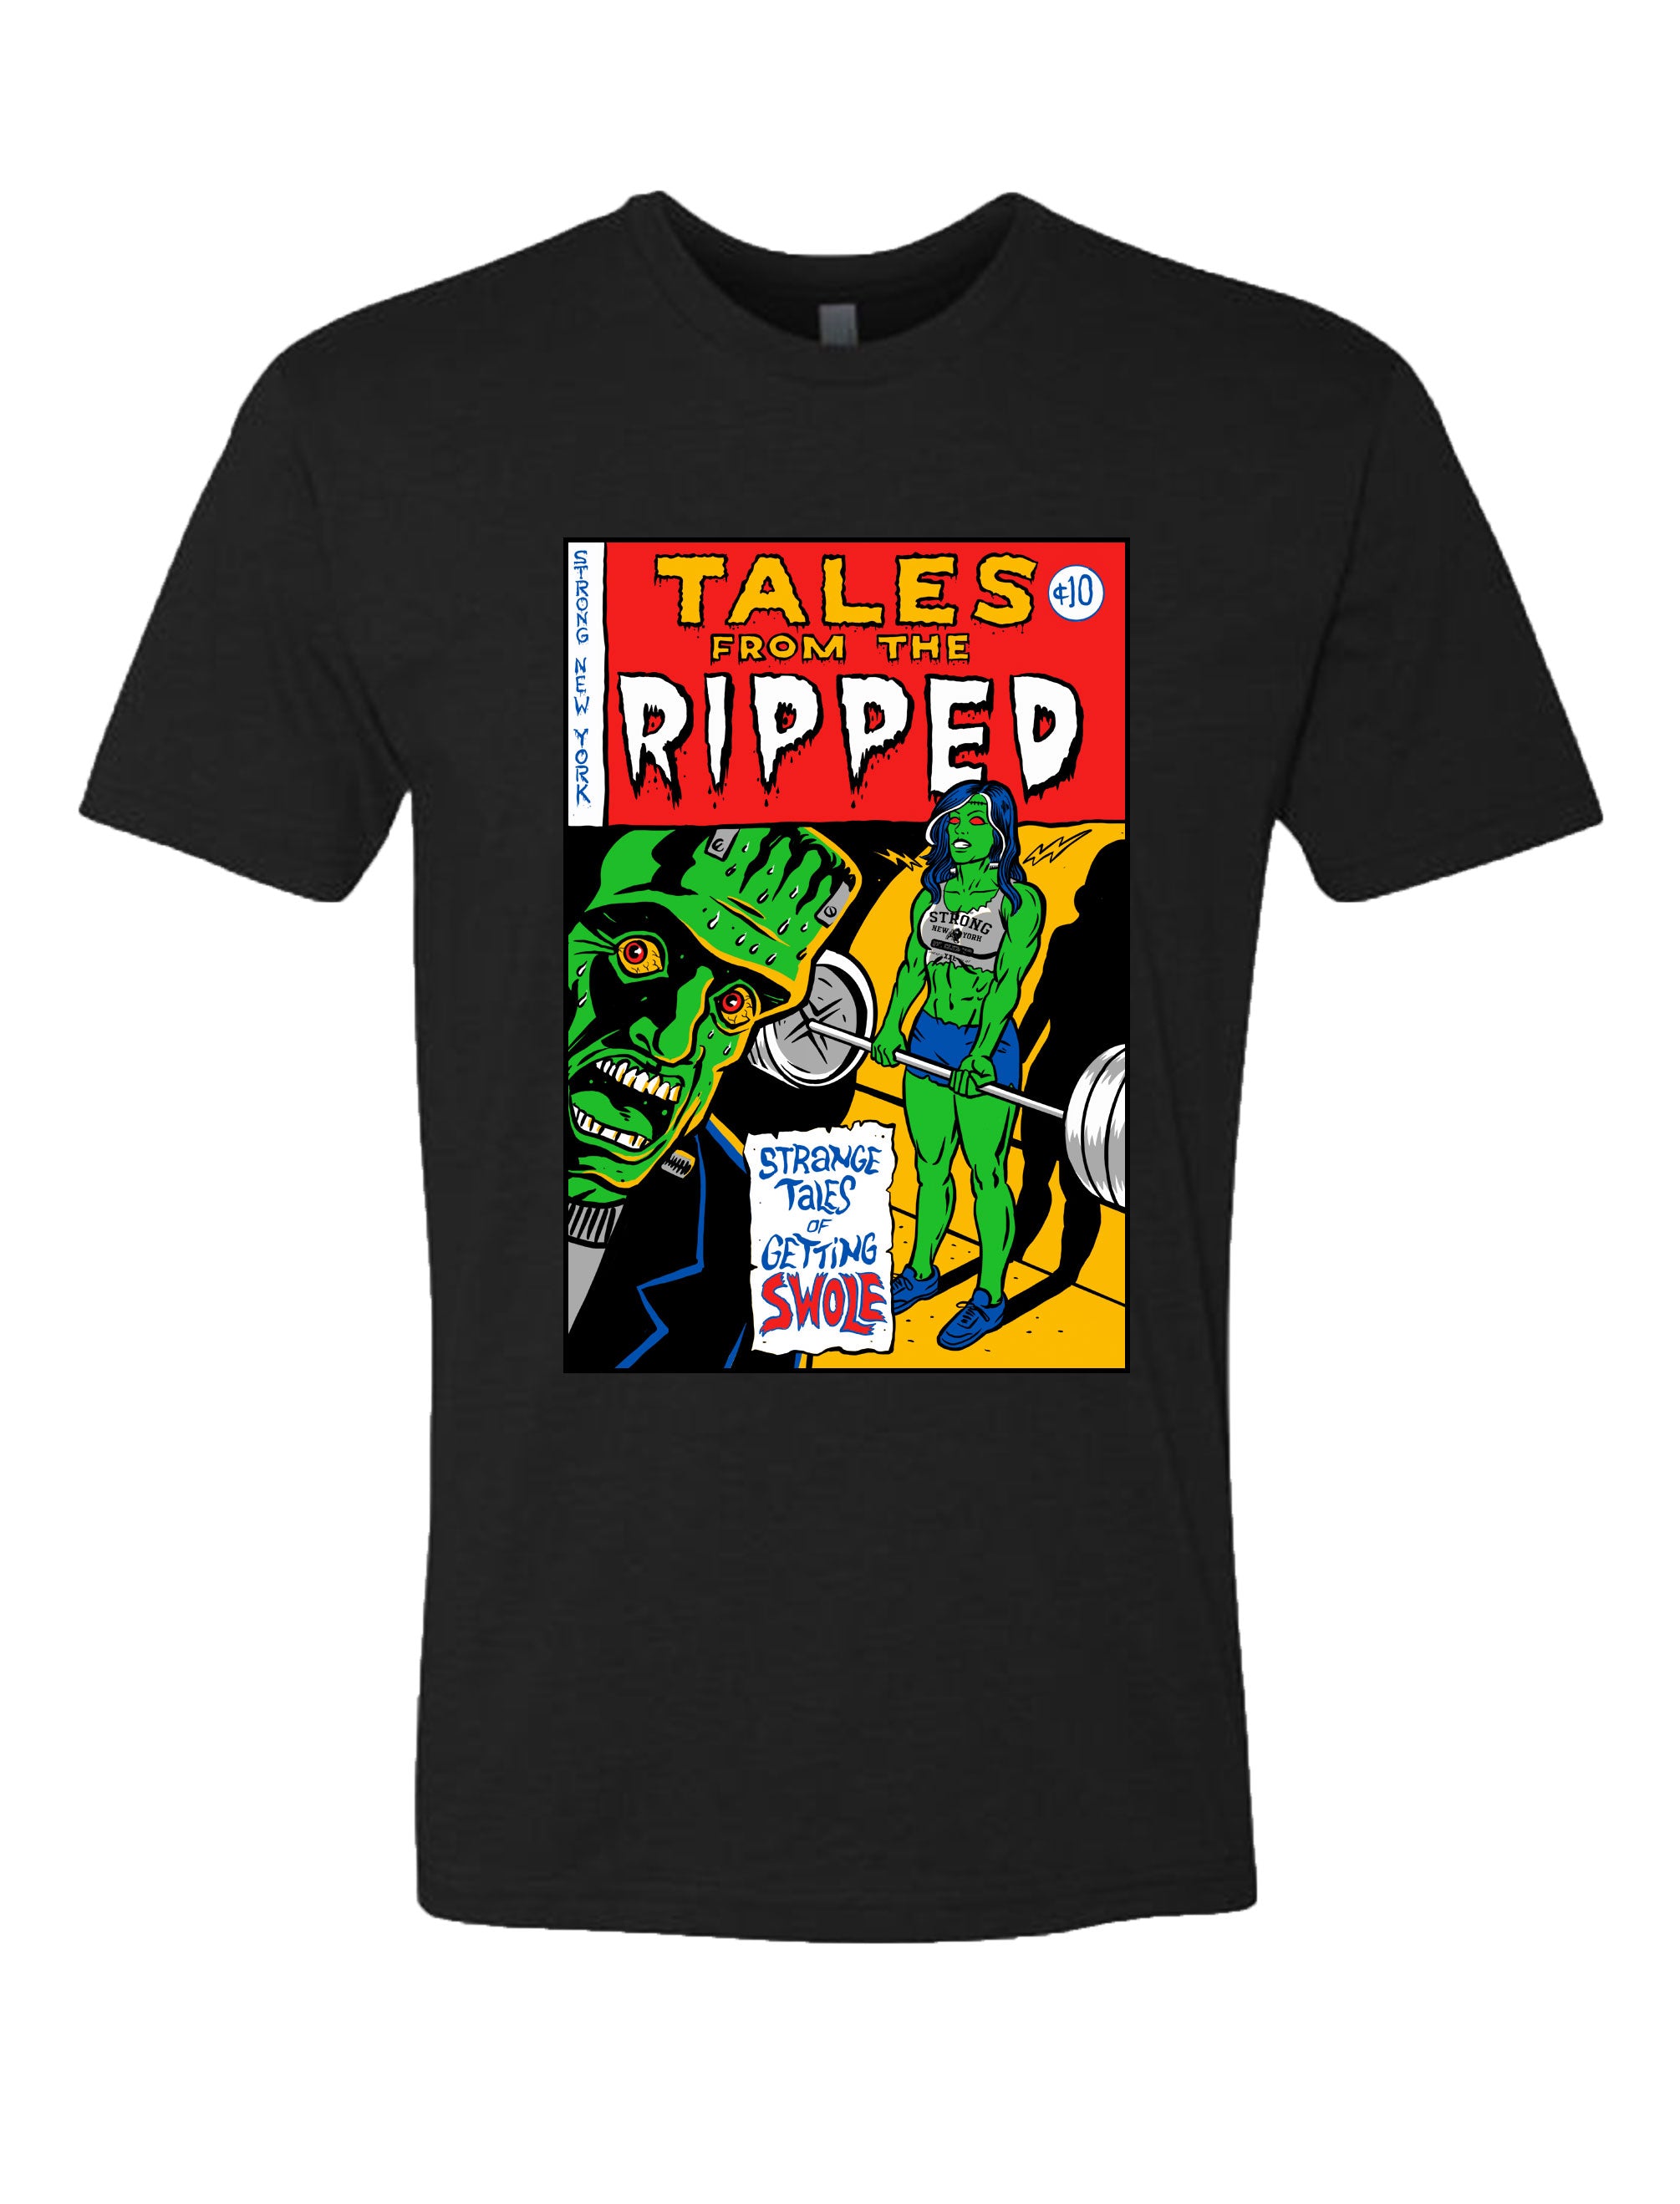 Tales of the Ripped T-Shirt